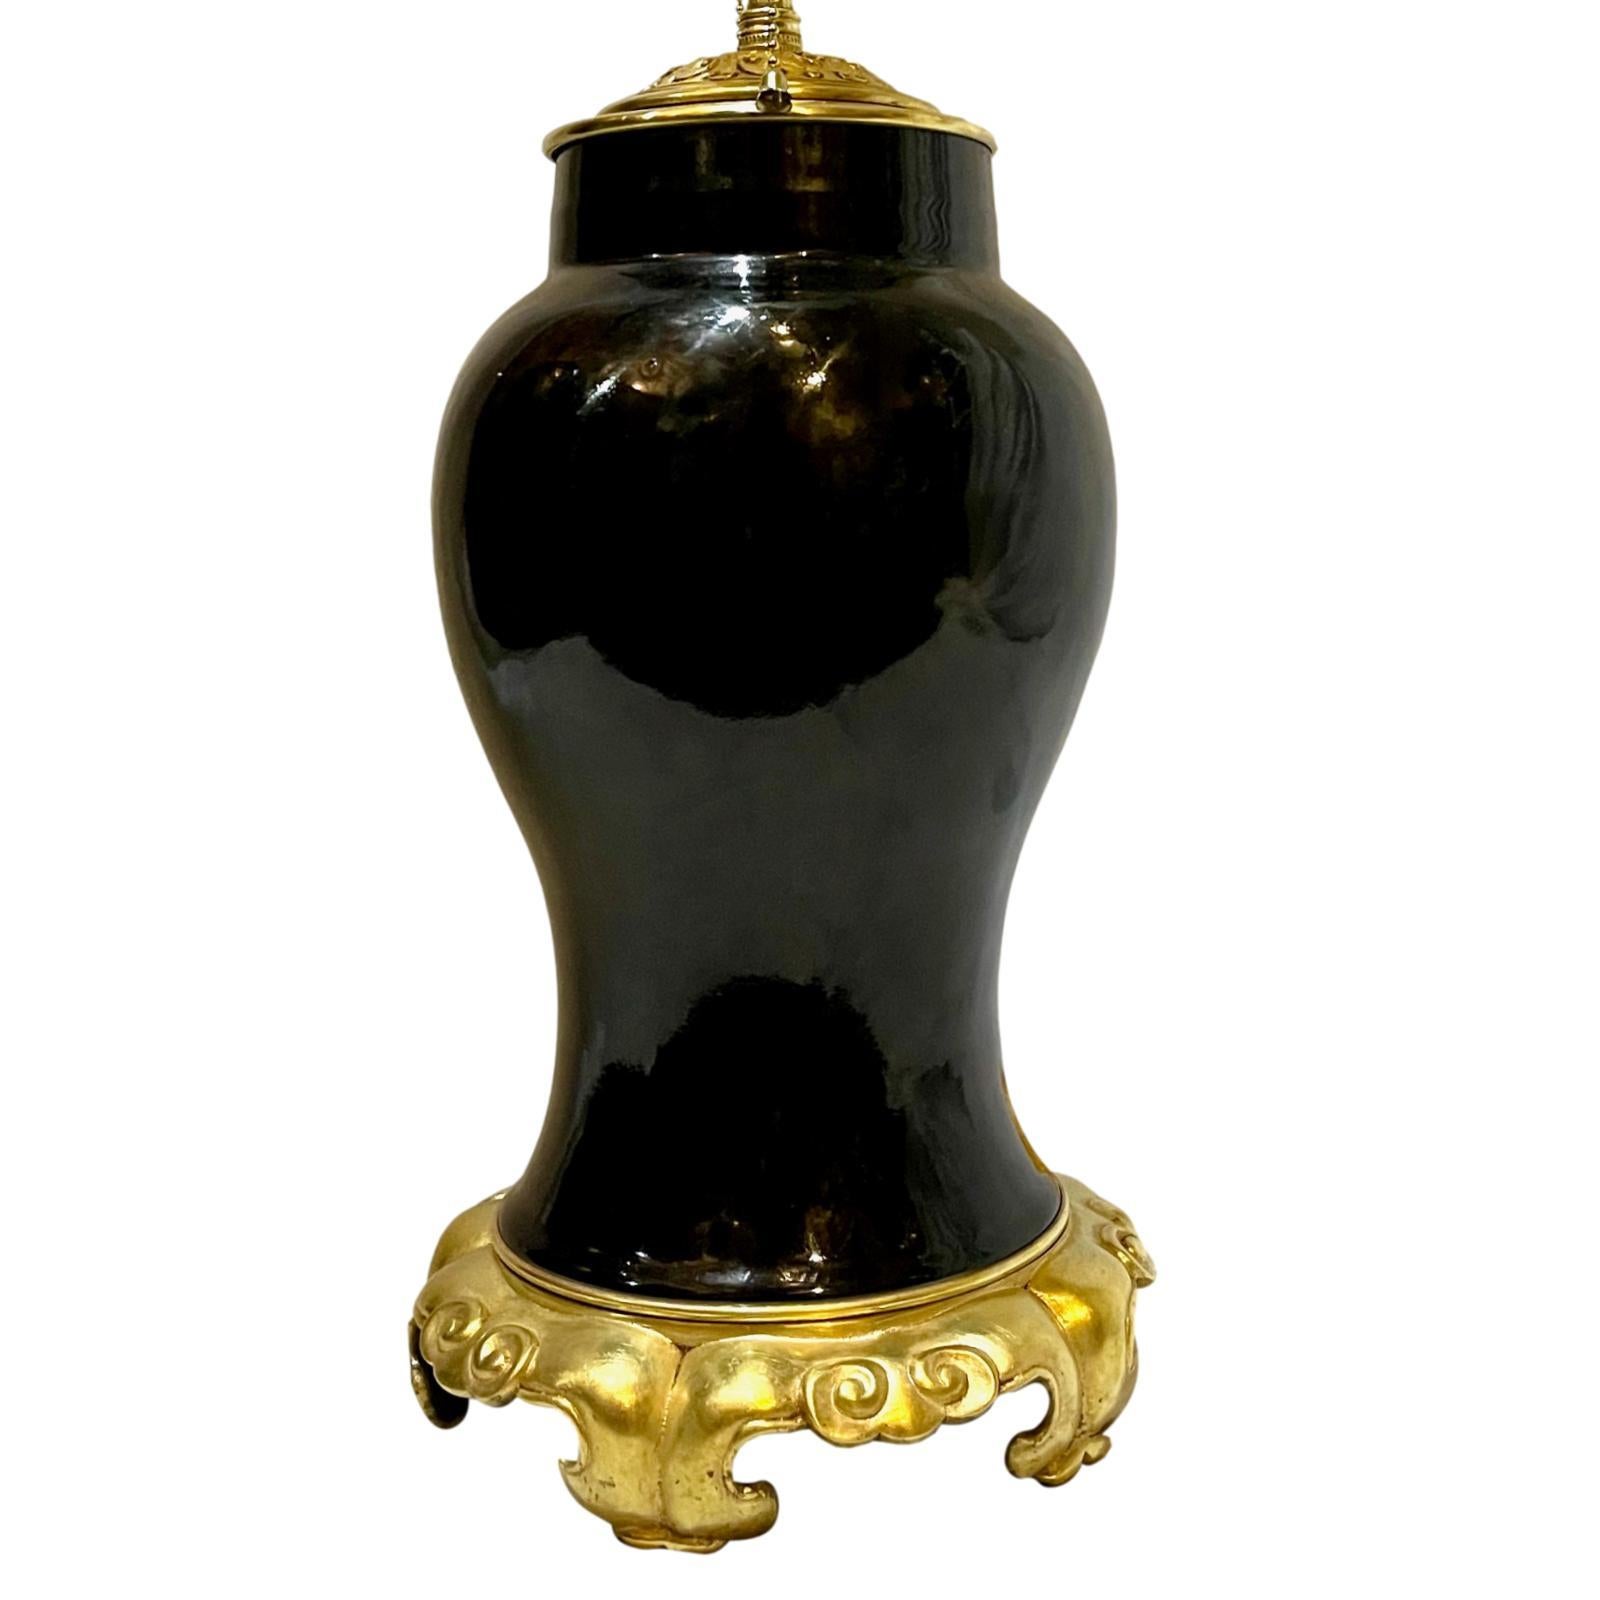 A single French circa 1900 porcelain table lamp with gilt bronze base with Chinese porcelain body.

Measurements:
Height of body: 14.5